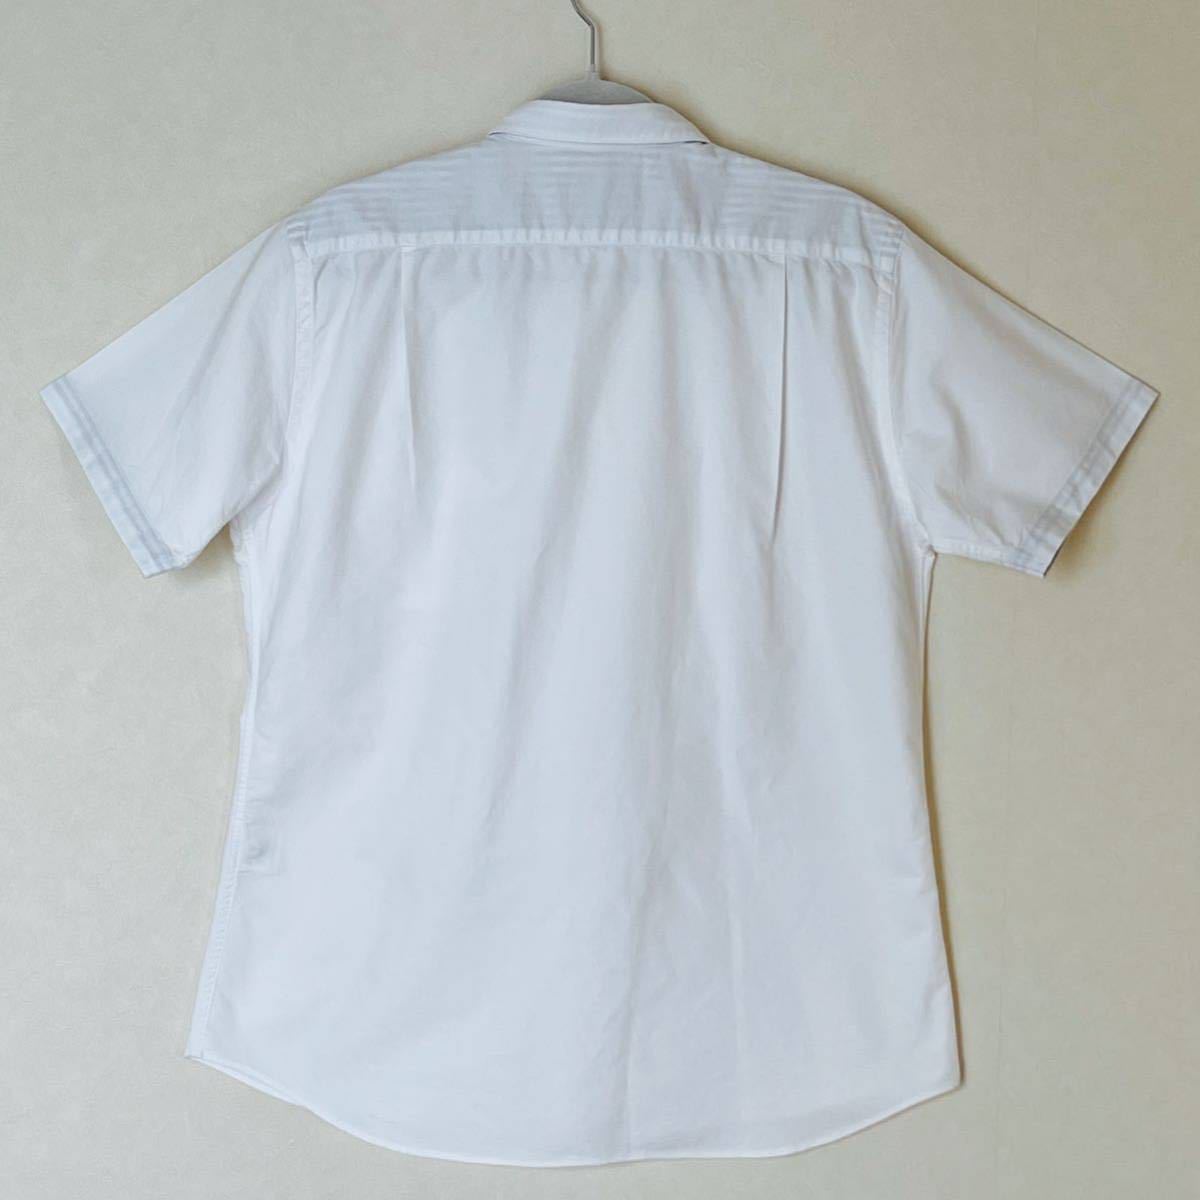  super-beauty goods BEAMS( Beams ) men's shirt L(T170-180cm) use 2 times white short sleeves tops spring summer autumn outdoor cotton cotton ( stock ) Beams 